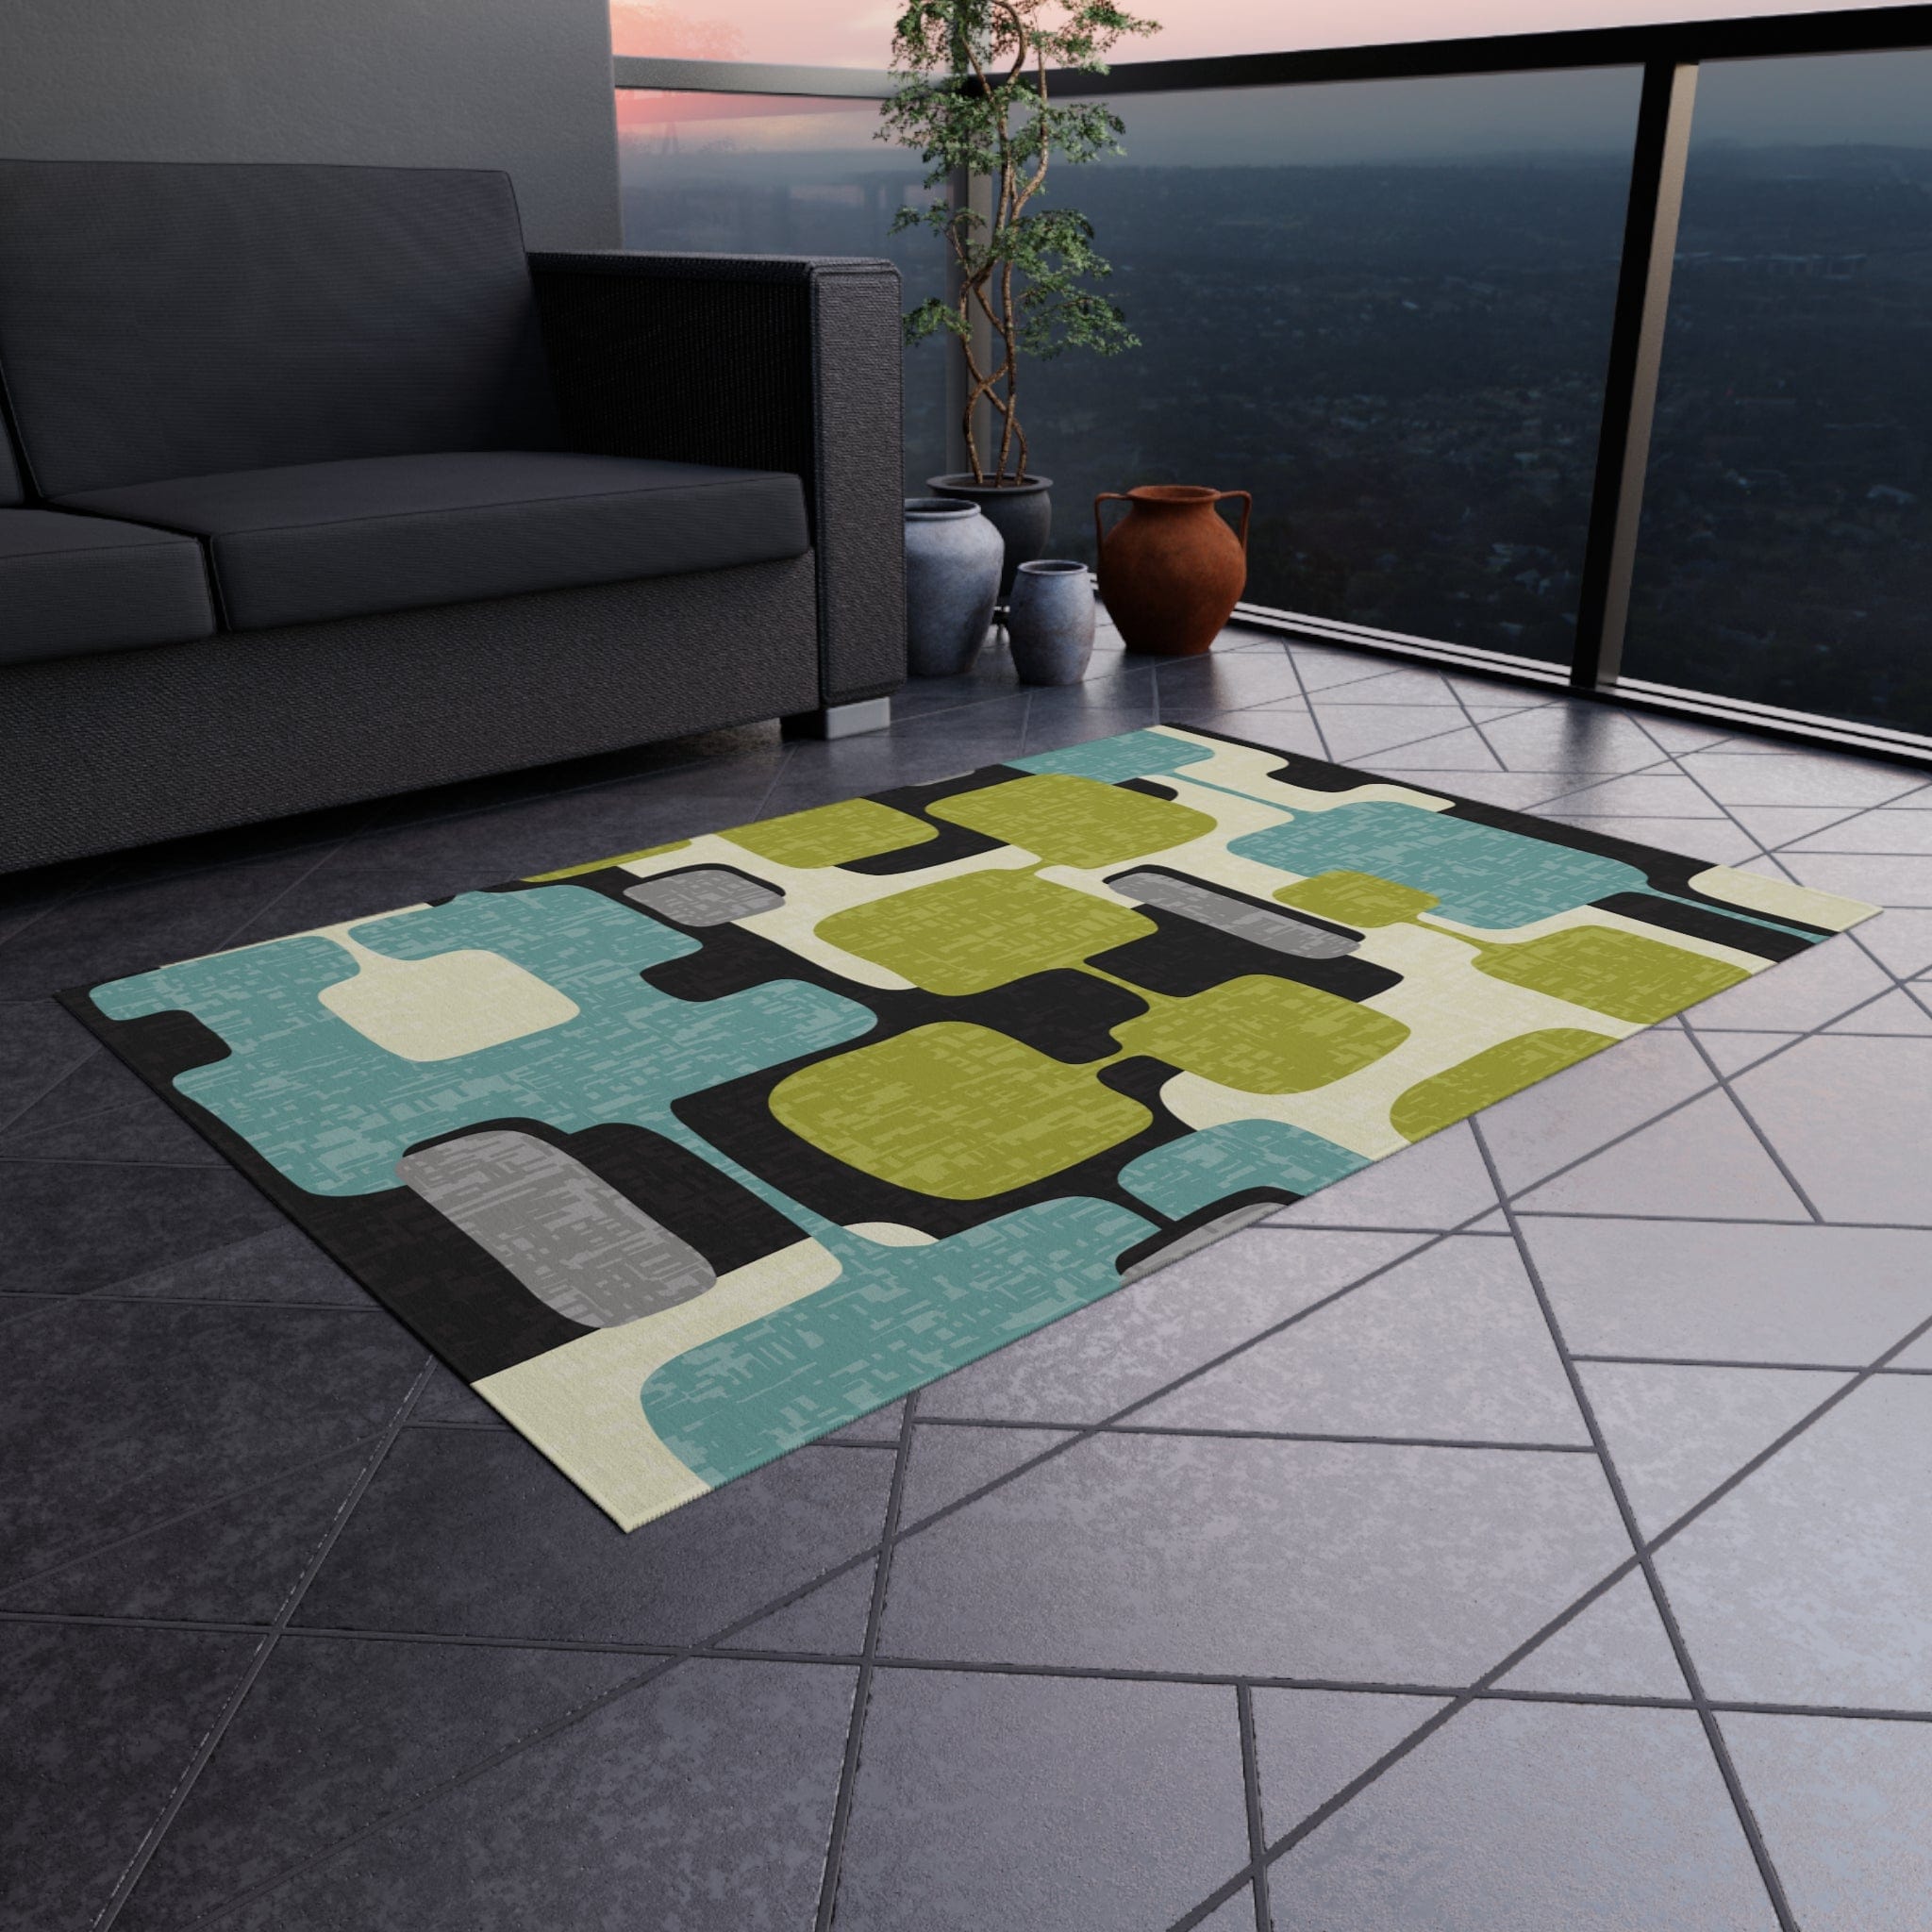 Kate McEnroe New York Retro Mid Century Modern Indoor - Outdoor Area Rug, MCM Teal, Lime Green, Gray, Cream Geometric Abstract Porch Patio Accent Rug Rugs